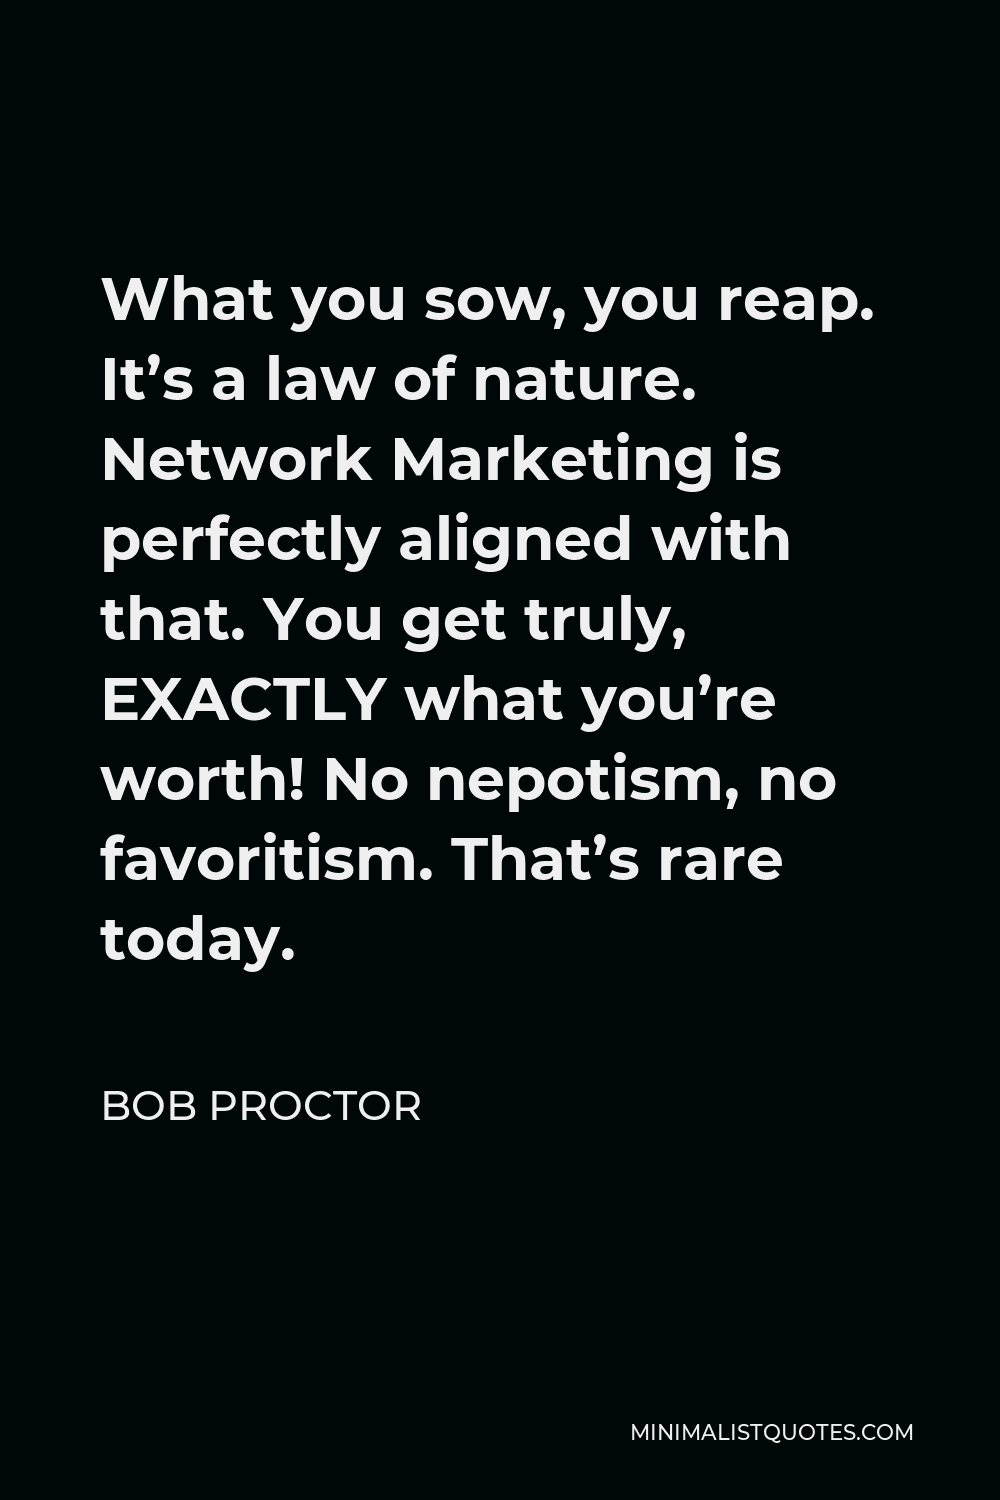 Bob Proctor Quote - What you sow, you reap. It’s a law of nature. Network Marketing is perfectly aligned with that. You get truly, EXACTLY what you’re worth! No nepotism, no favoritism. That’s rare today.